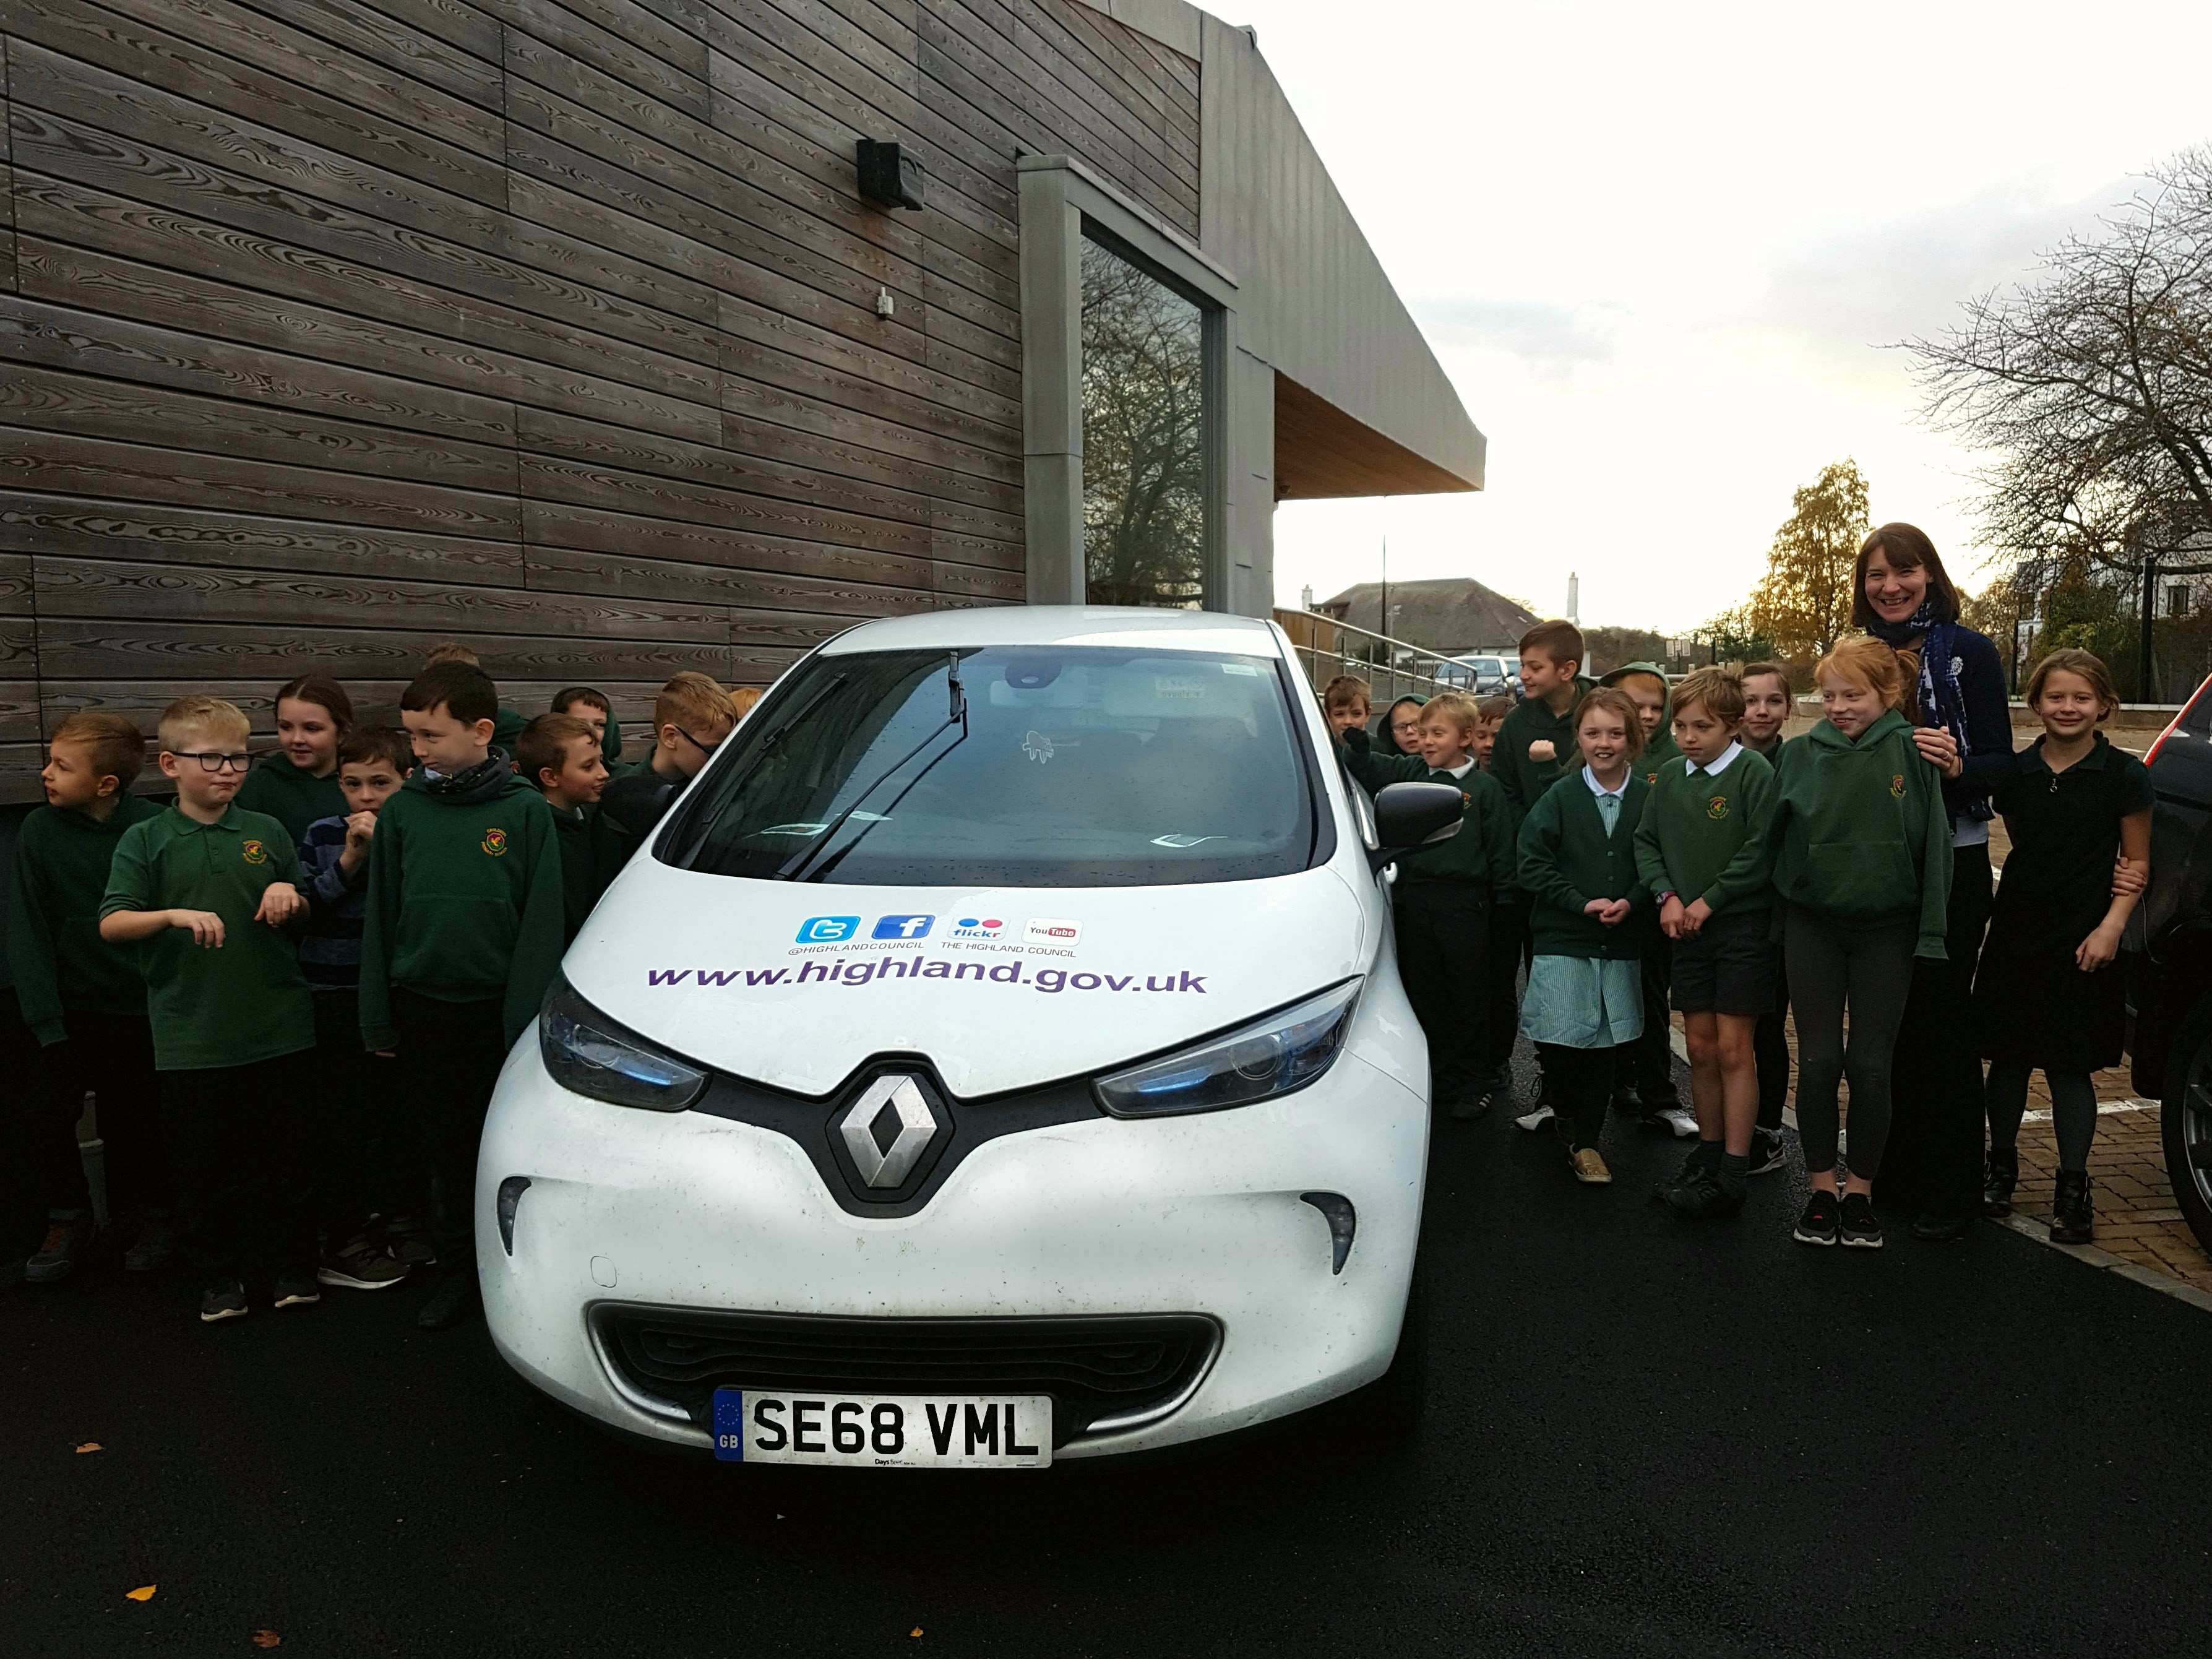 The Highland Council has launched a competition to encourage school children to get involved in helping moving towards a lower carbon source of travel